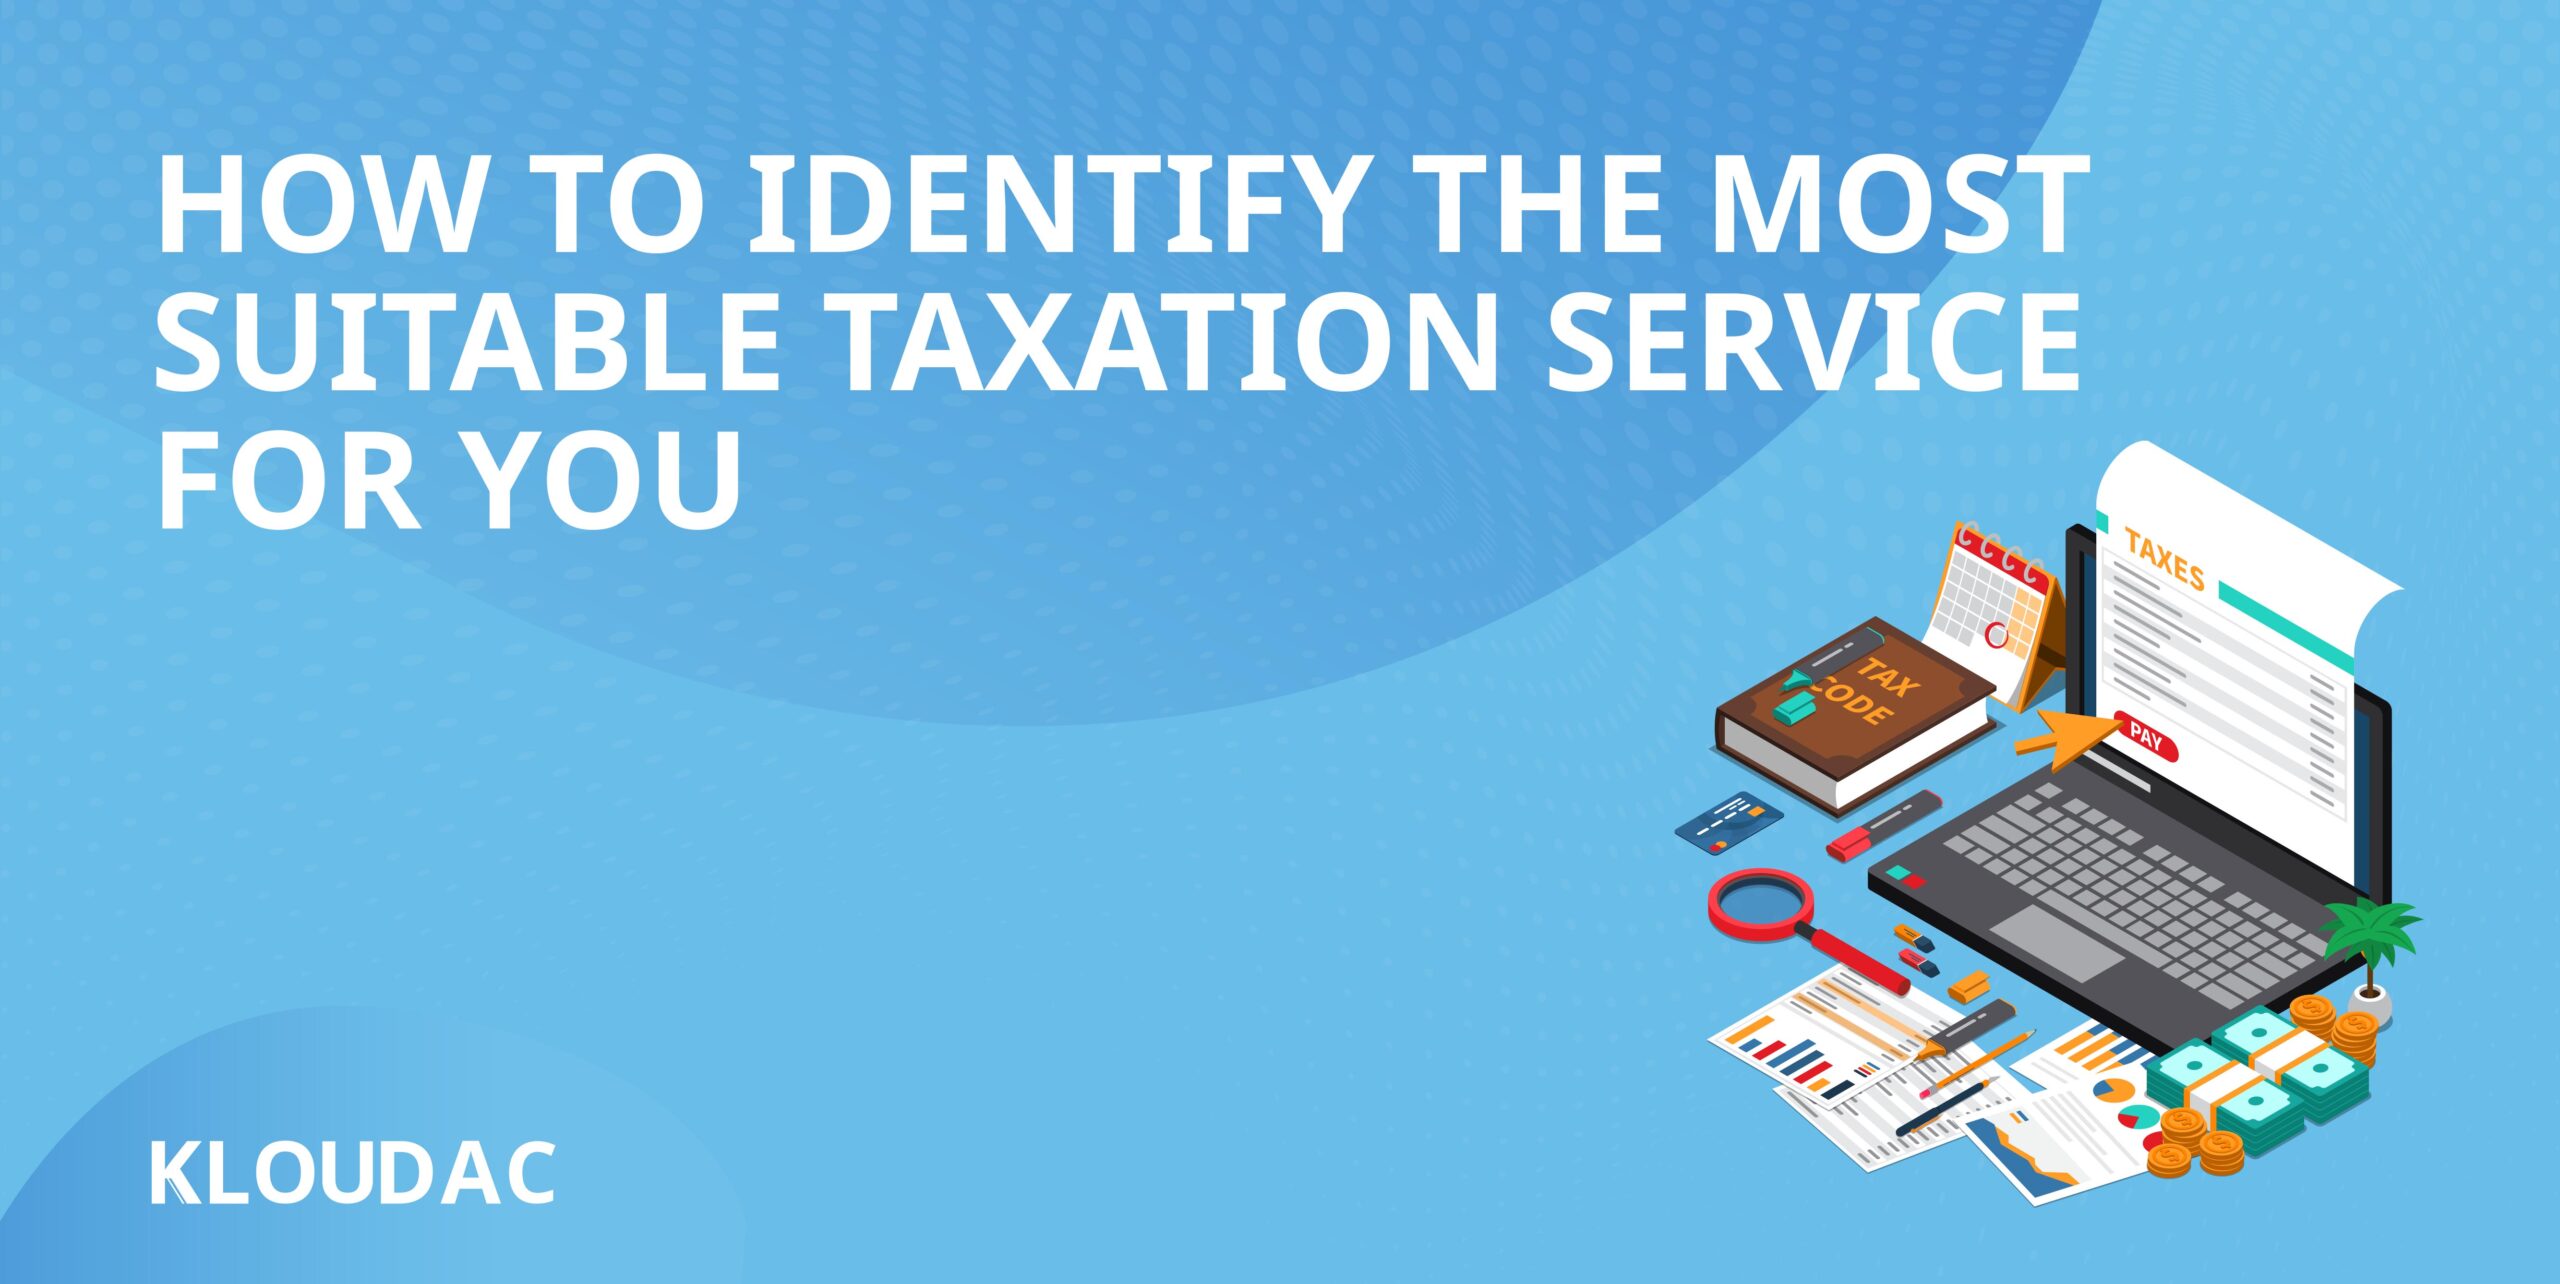 How to Identify the most suitable taxation service for you?